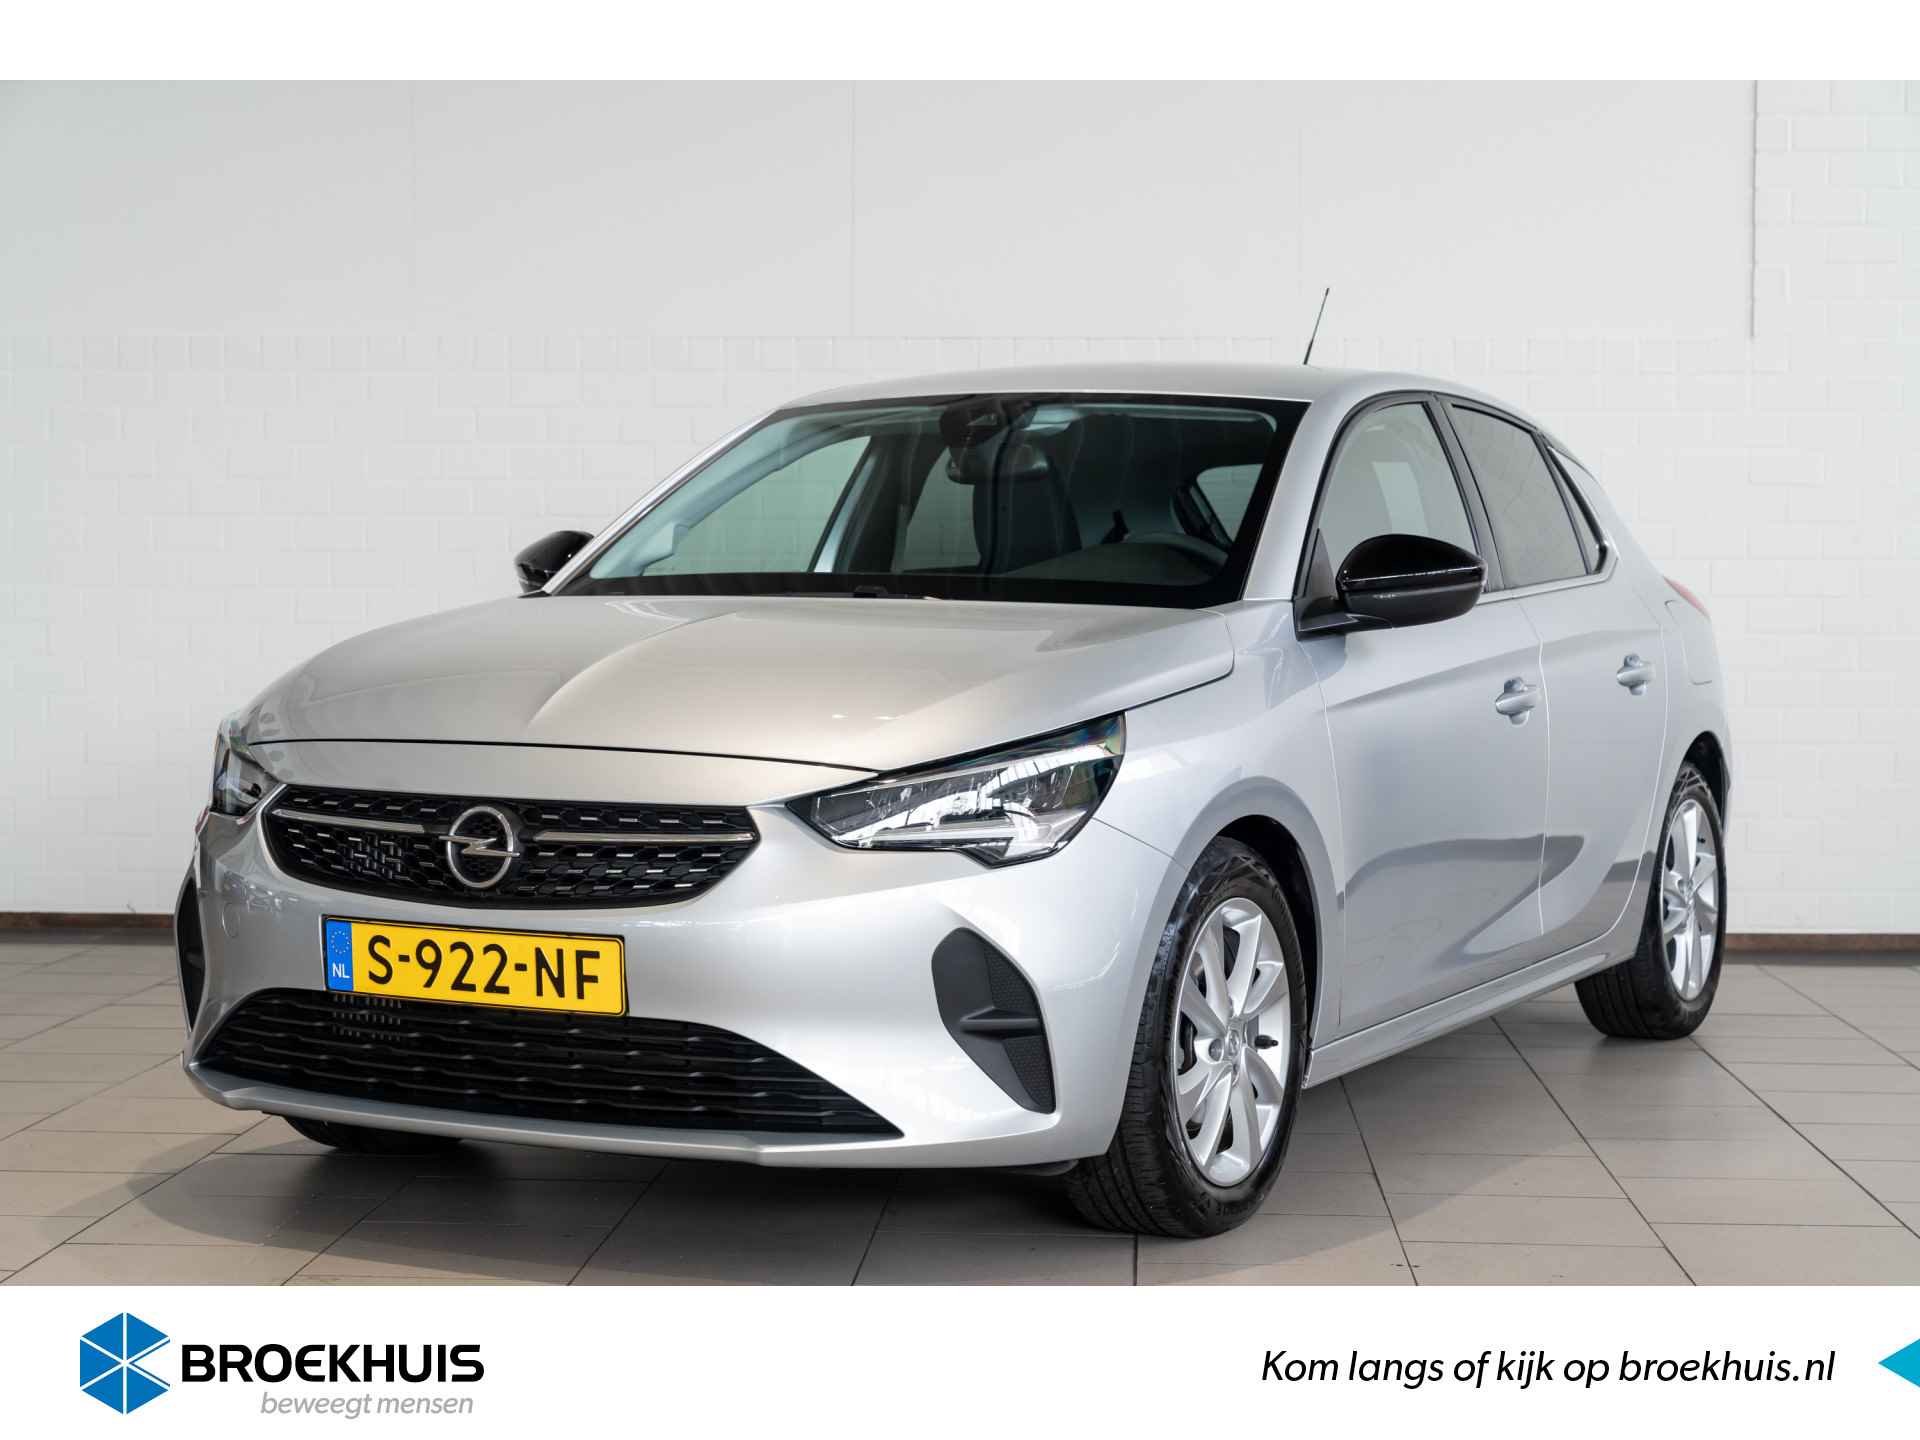 Opel Corsa 1.2 Turbo 100 PK Elegance | Navigatie | Climate Controle | Donker Glas | Apple Carplay & Android Auto | - 1/31